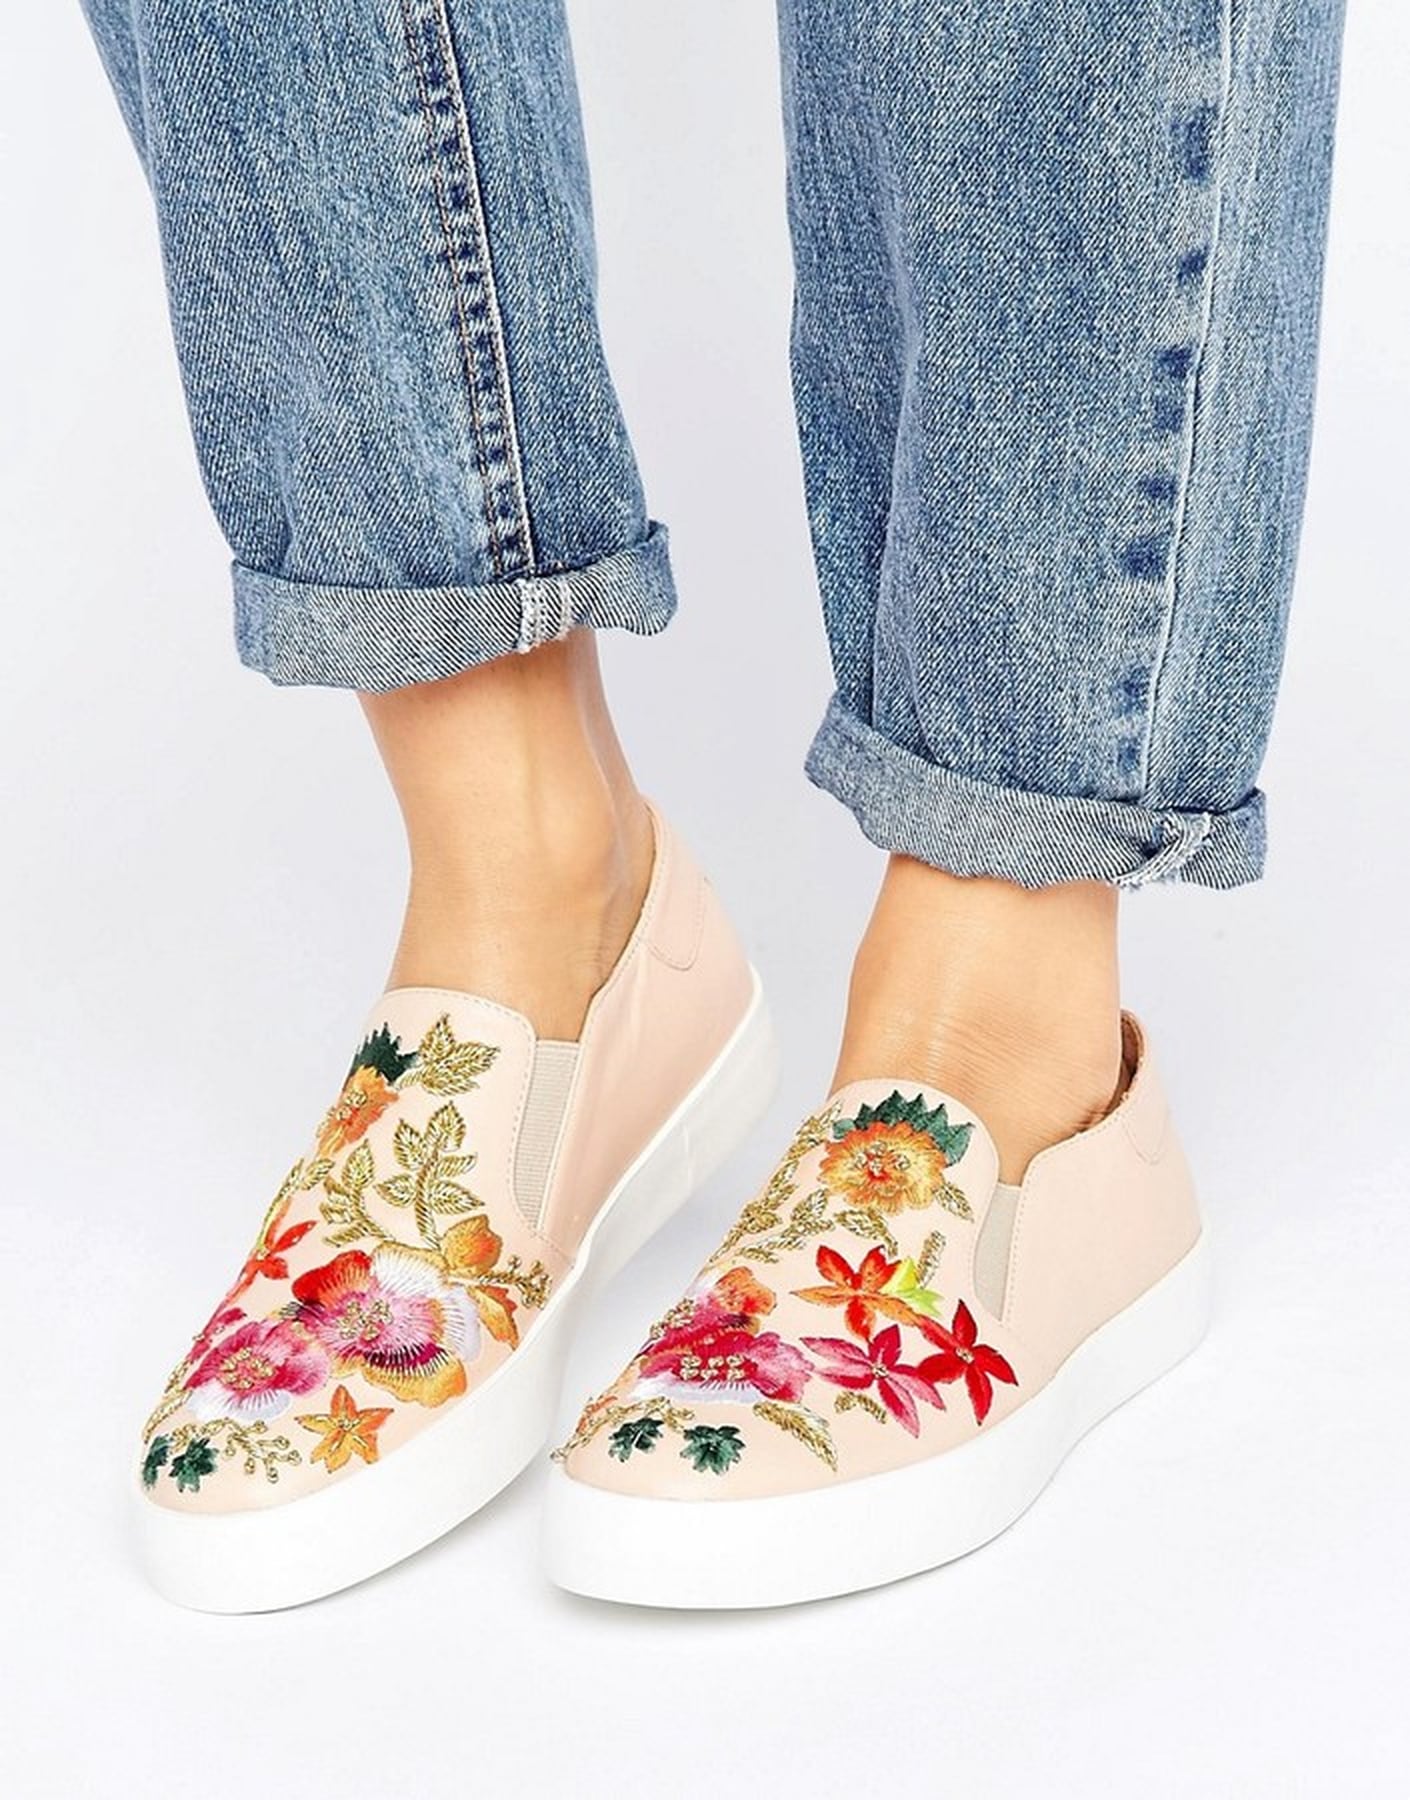 Best Embroidered Sneakers | POPSUGAR Fashion